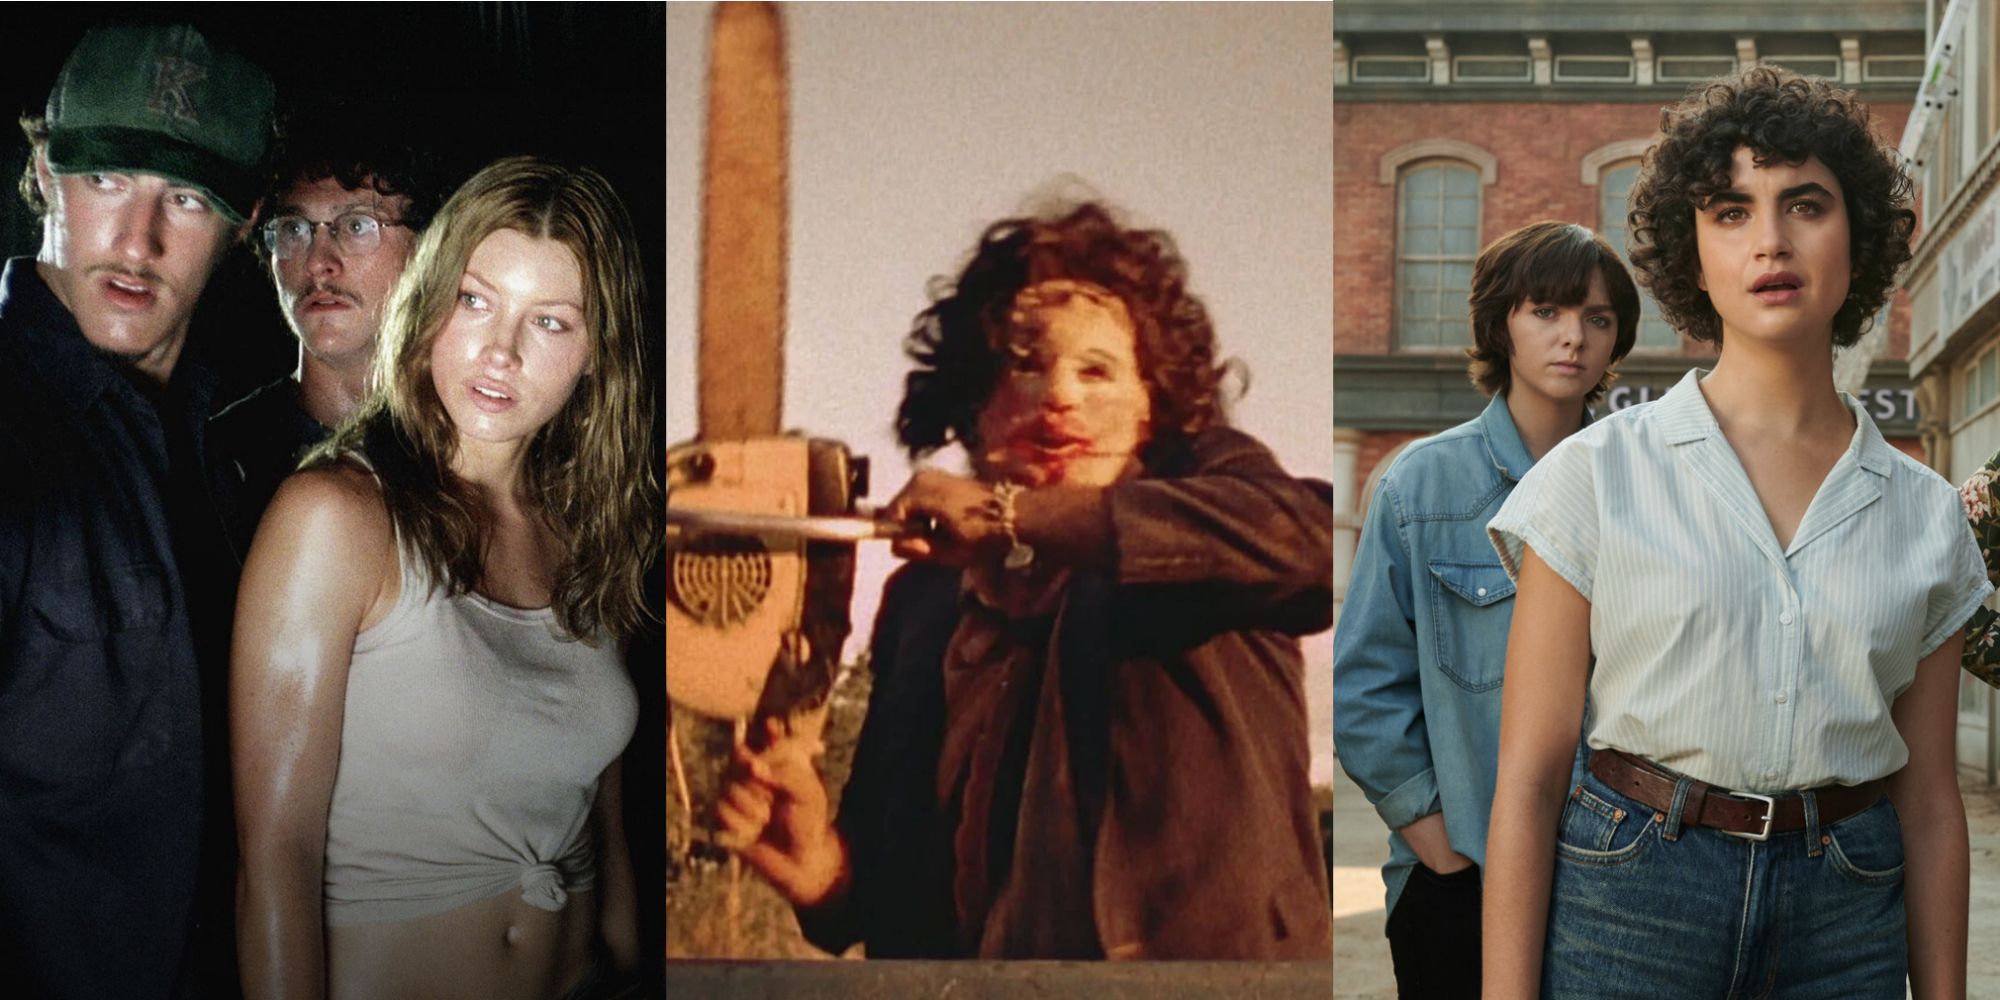 Split image of characters in Texas Chainsaw Massacre movies and Leeatherface